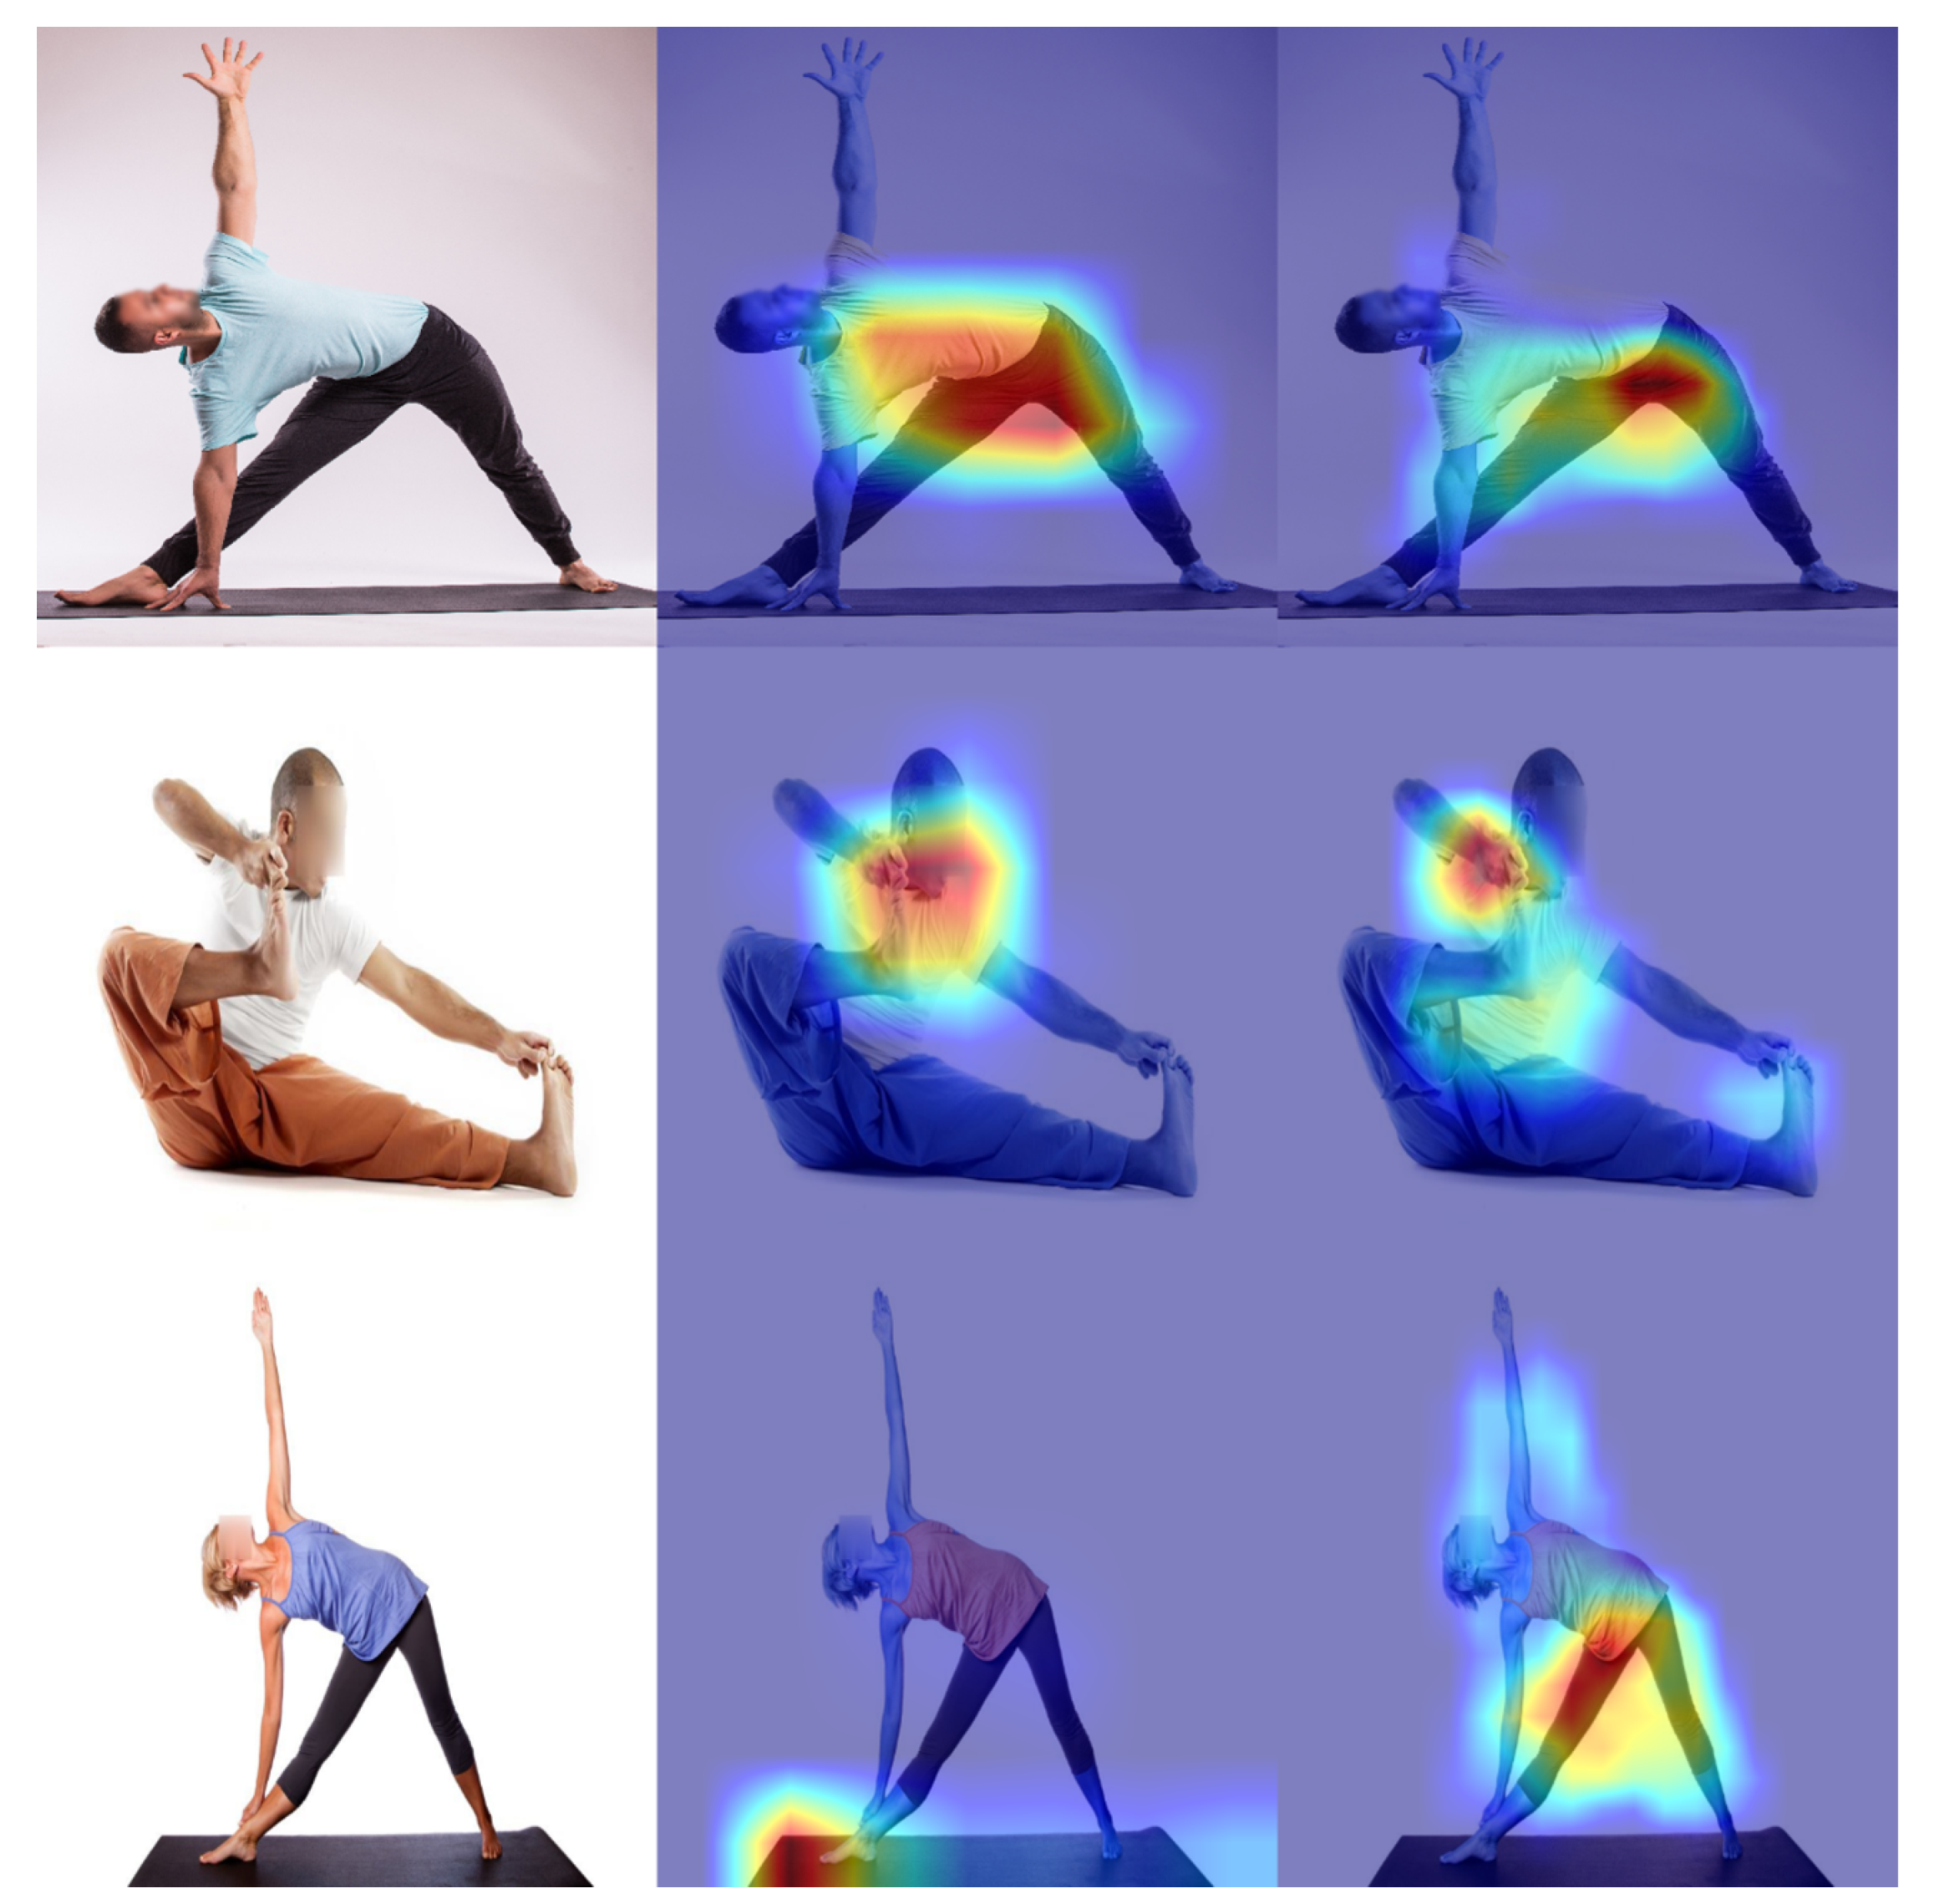 Video recognition of yoga postures